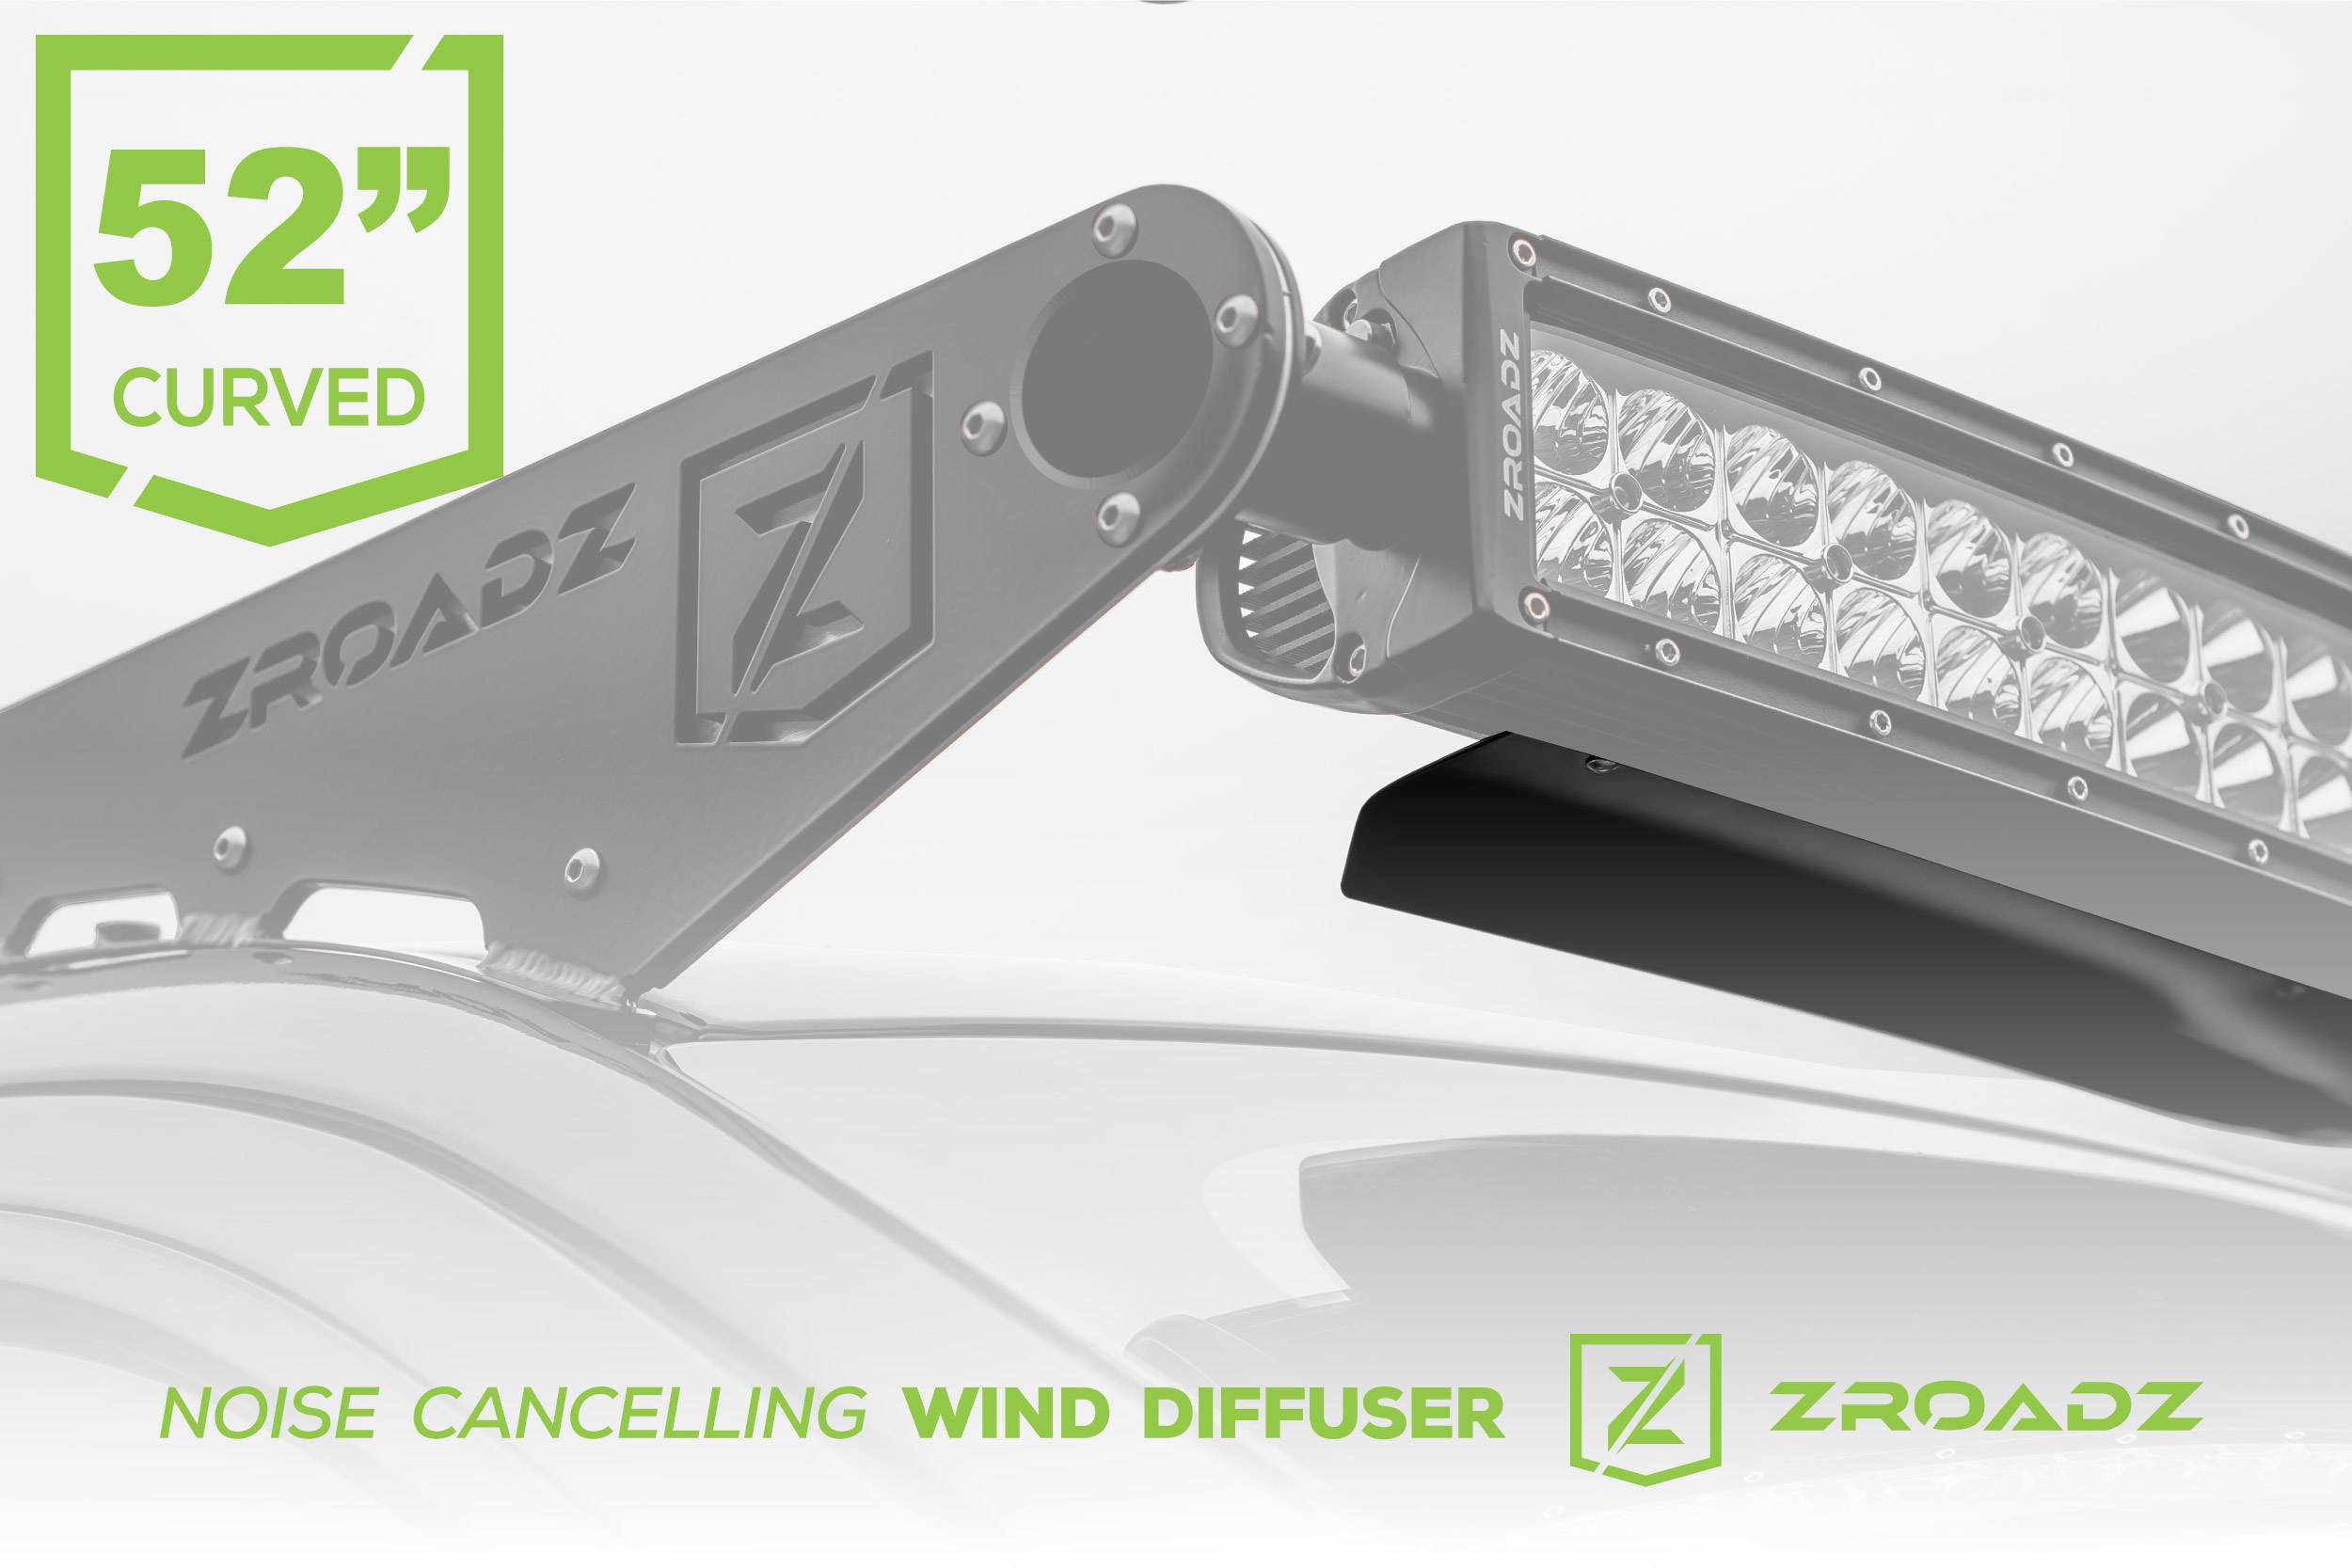 ZROADZ OFF ROAD PRODUCTS - Noise Cancelling Wind Diffuser for 52 Inch Curved Double Row LED Light Bar - Part # Z330052C